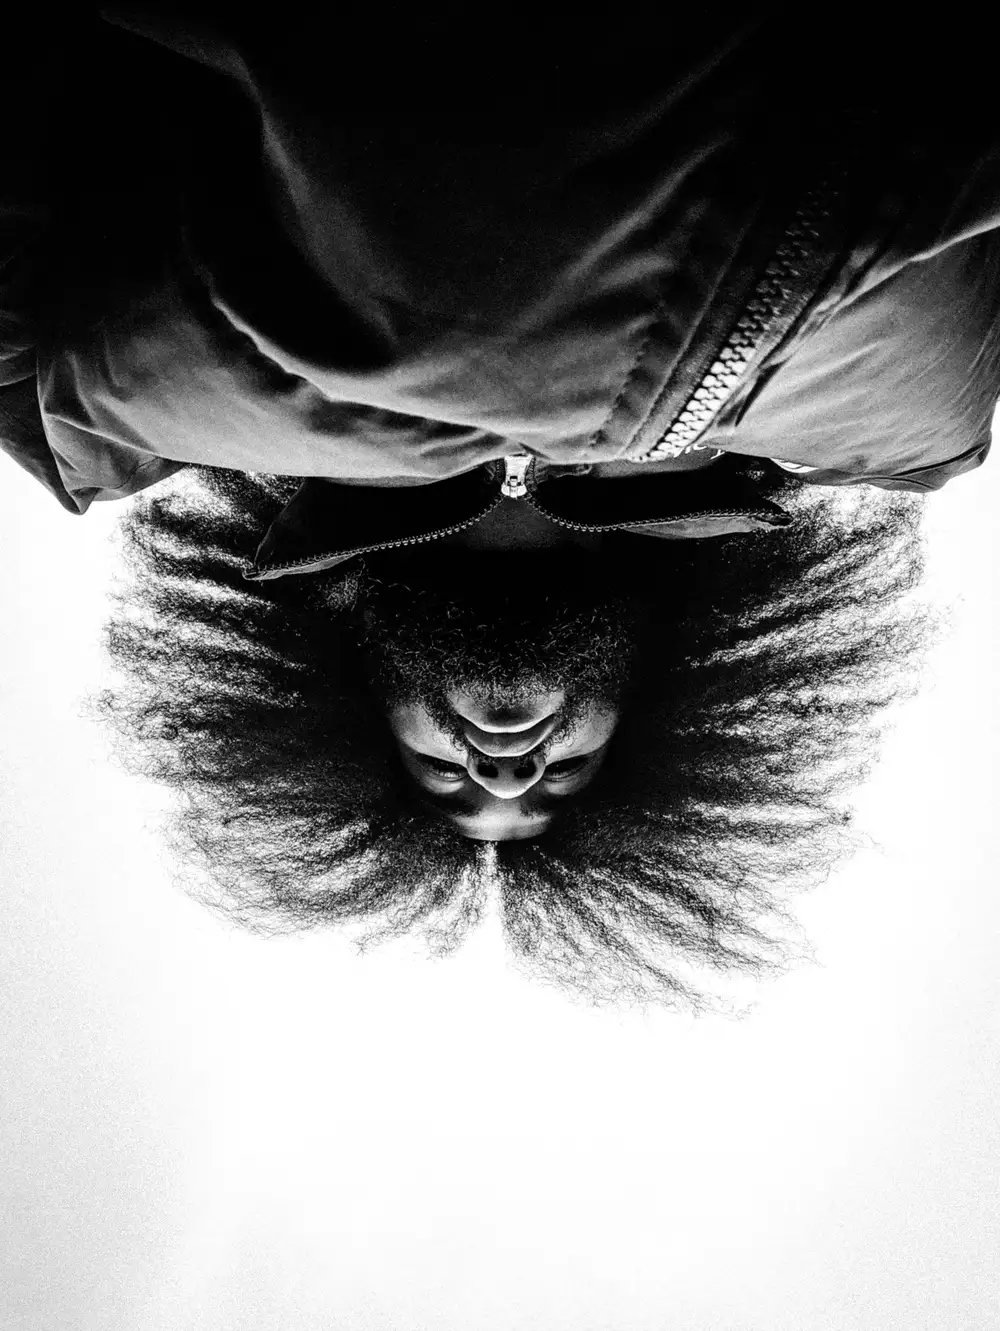 upside down image of a hairy guy